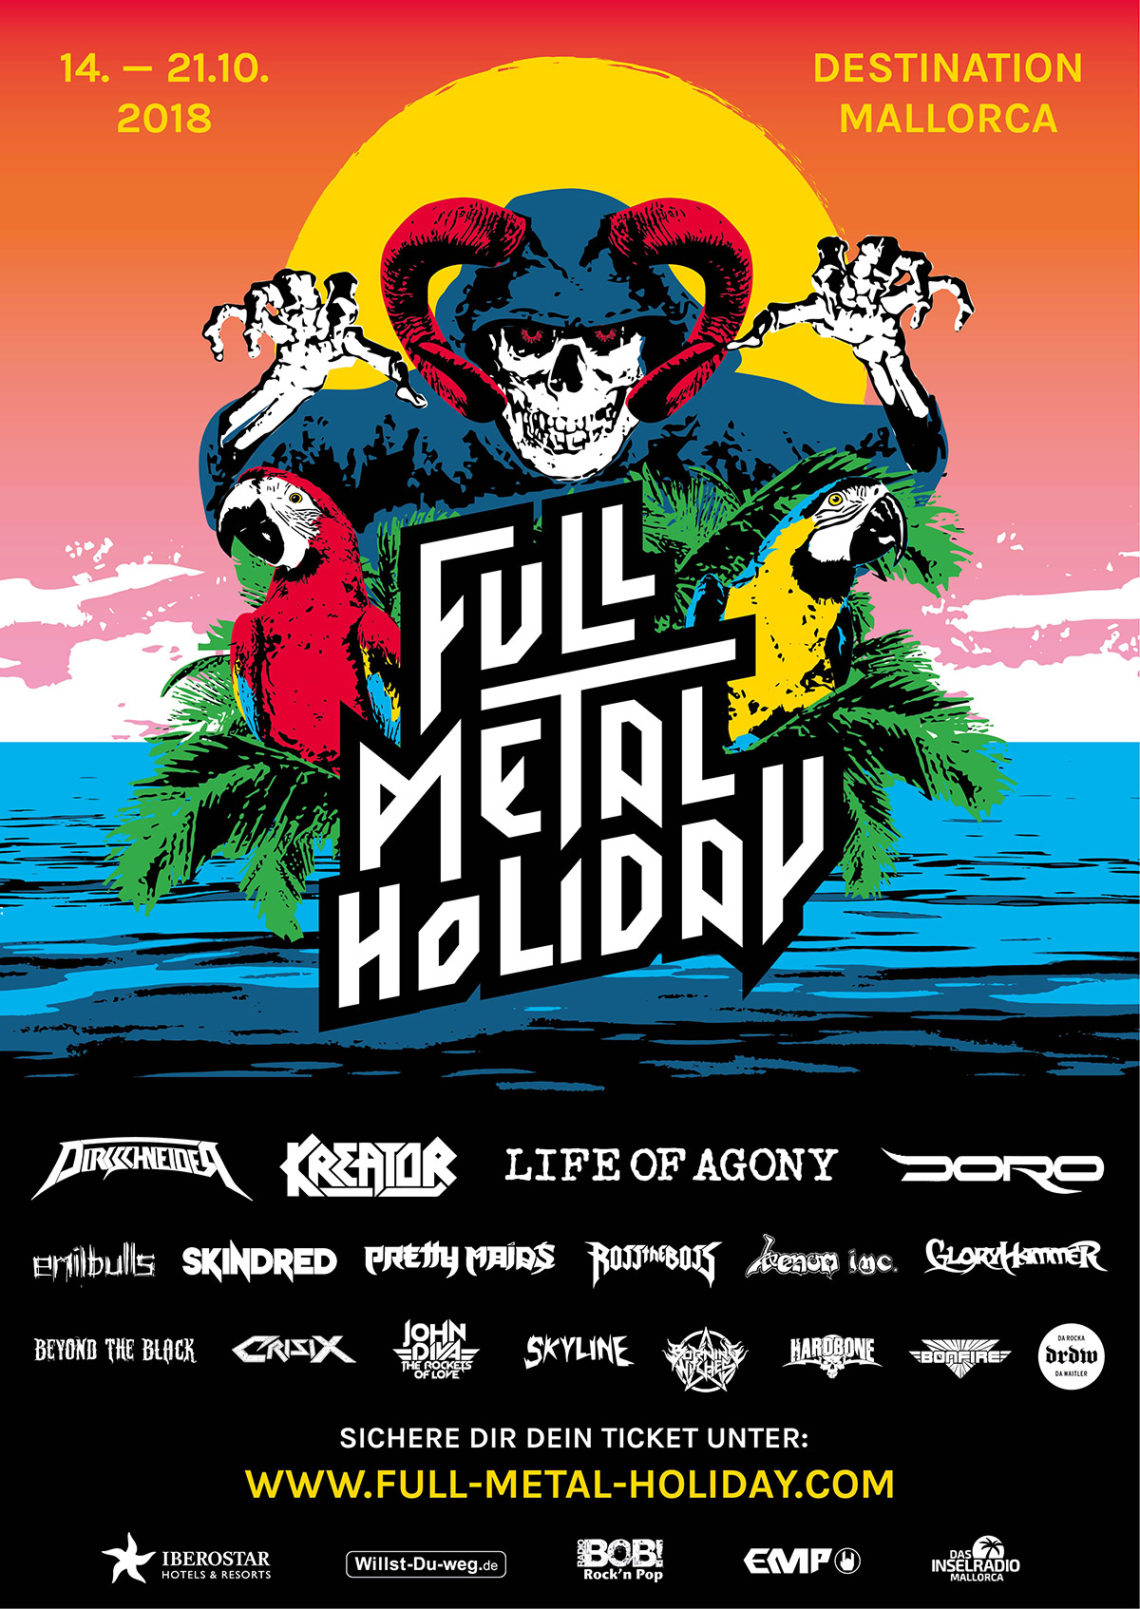 ‘Full Metal Holiday’ Destination Mallorca“ Takes Place For The First